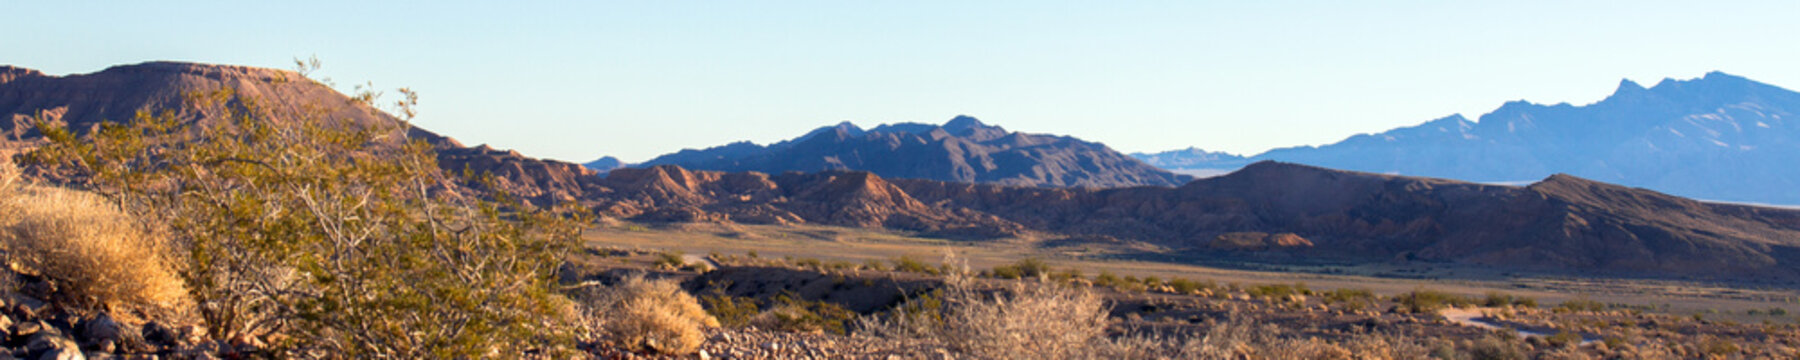 Ultra-wide panorama of Gold Butte National Monument at dawn as seen from Lake Mead National Recreation Area in Nevada